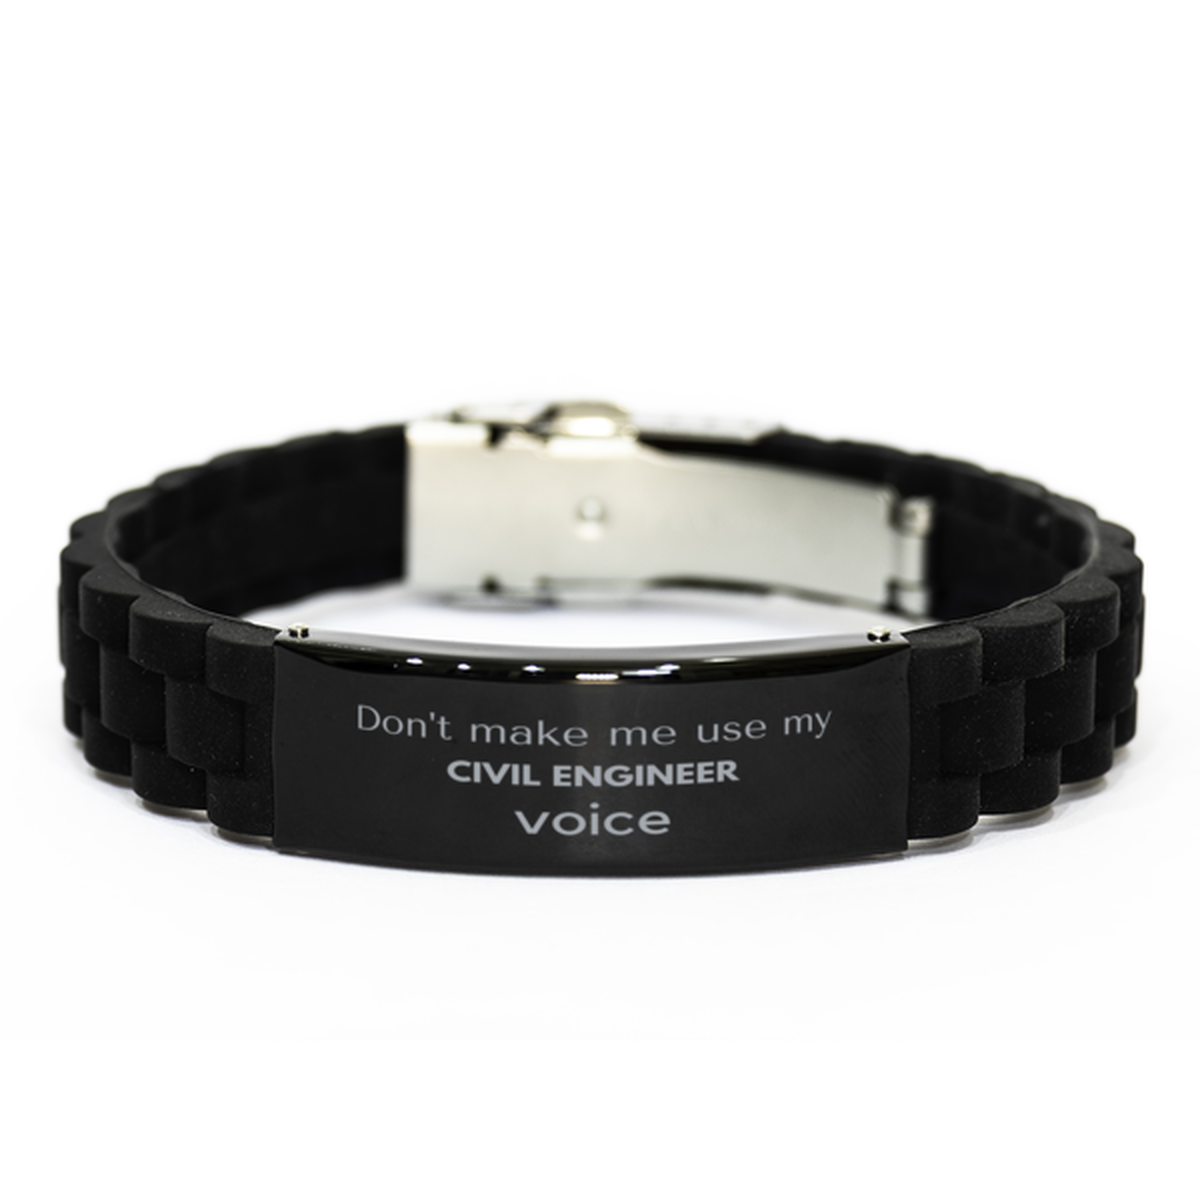 Don't make me use my Civil Engineer voice, Sarcasm Civil Engineer Gifts, Christmas Civil Engineer Black Glidelock Clasp Bracelet Birthday Unique Gifts For Civil Engineer Coworkers, Men, Women, Colleague, Friends